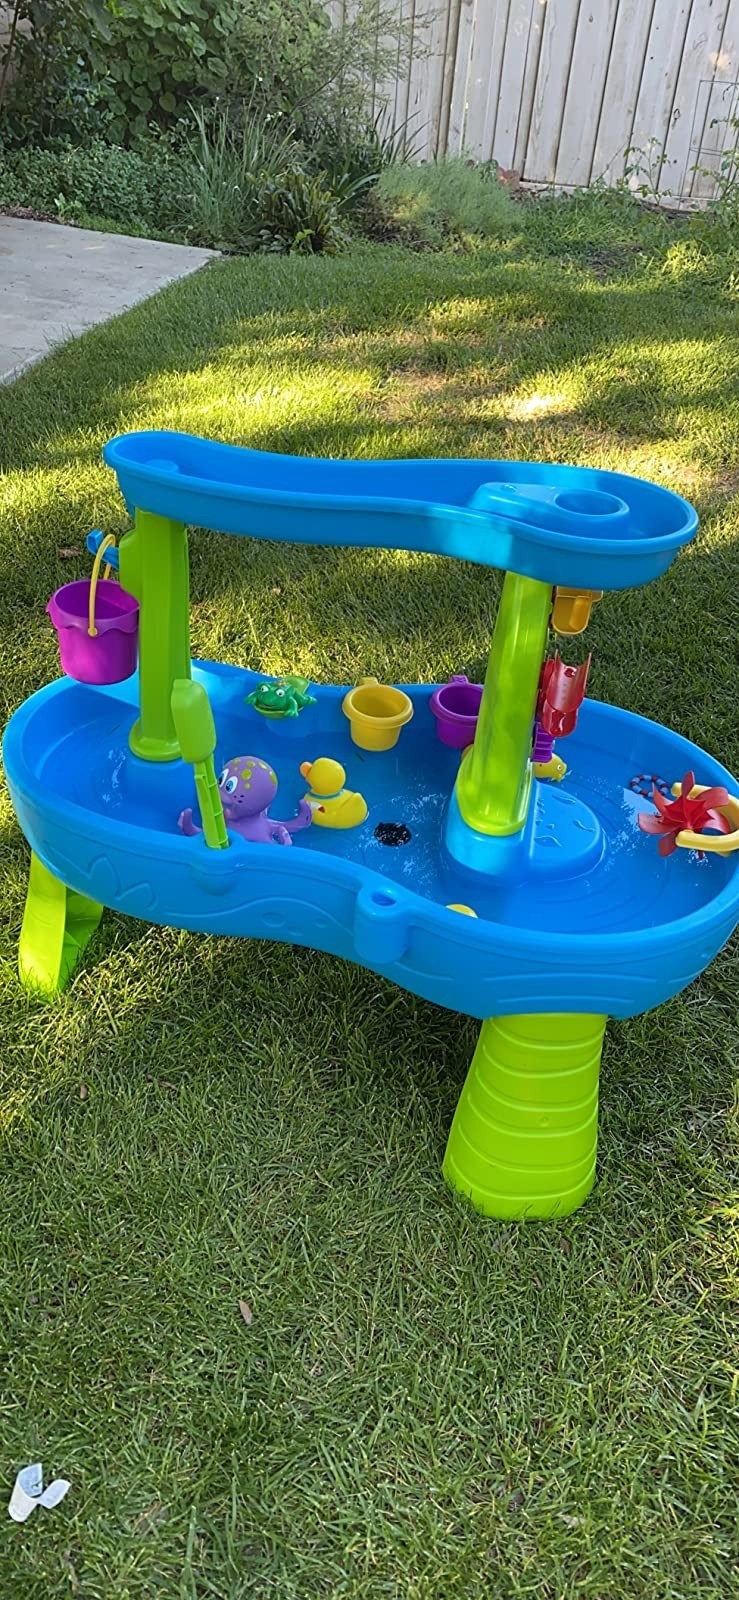 Water table sits in grass